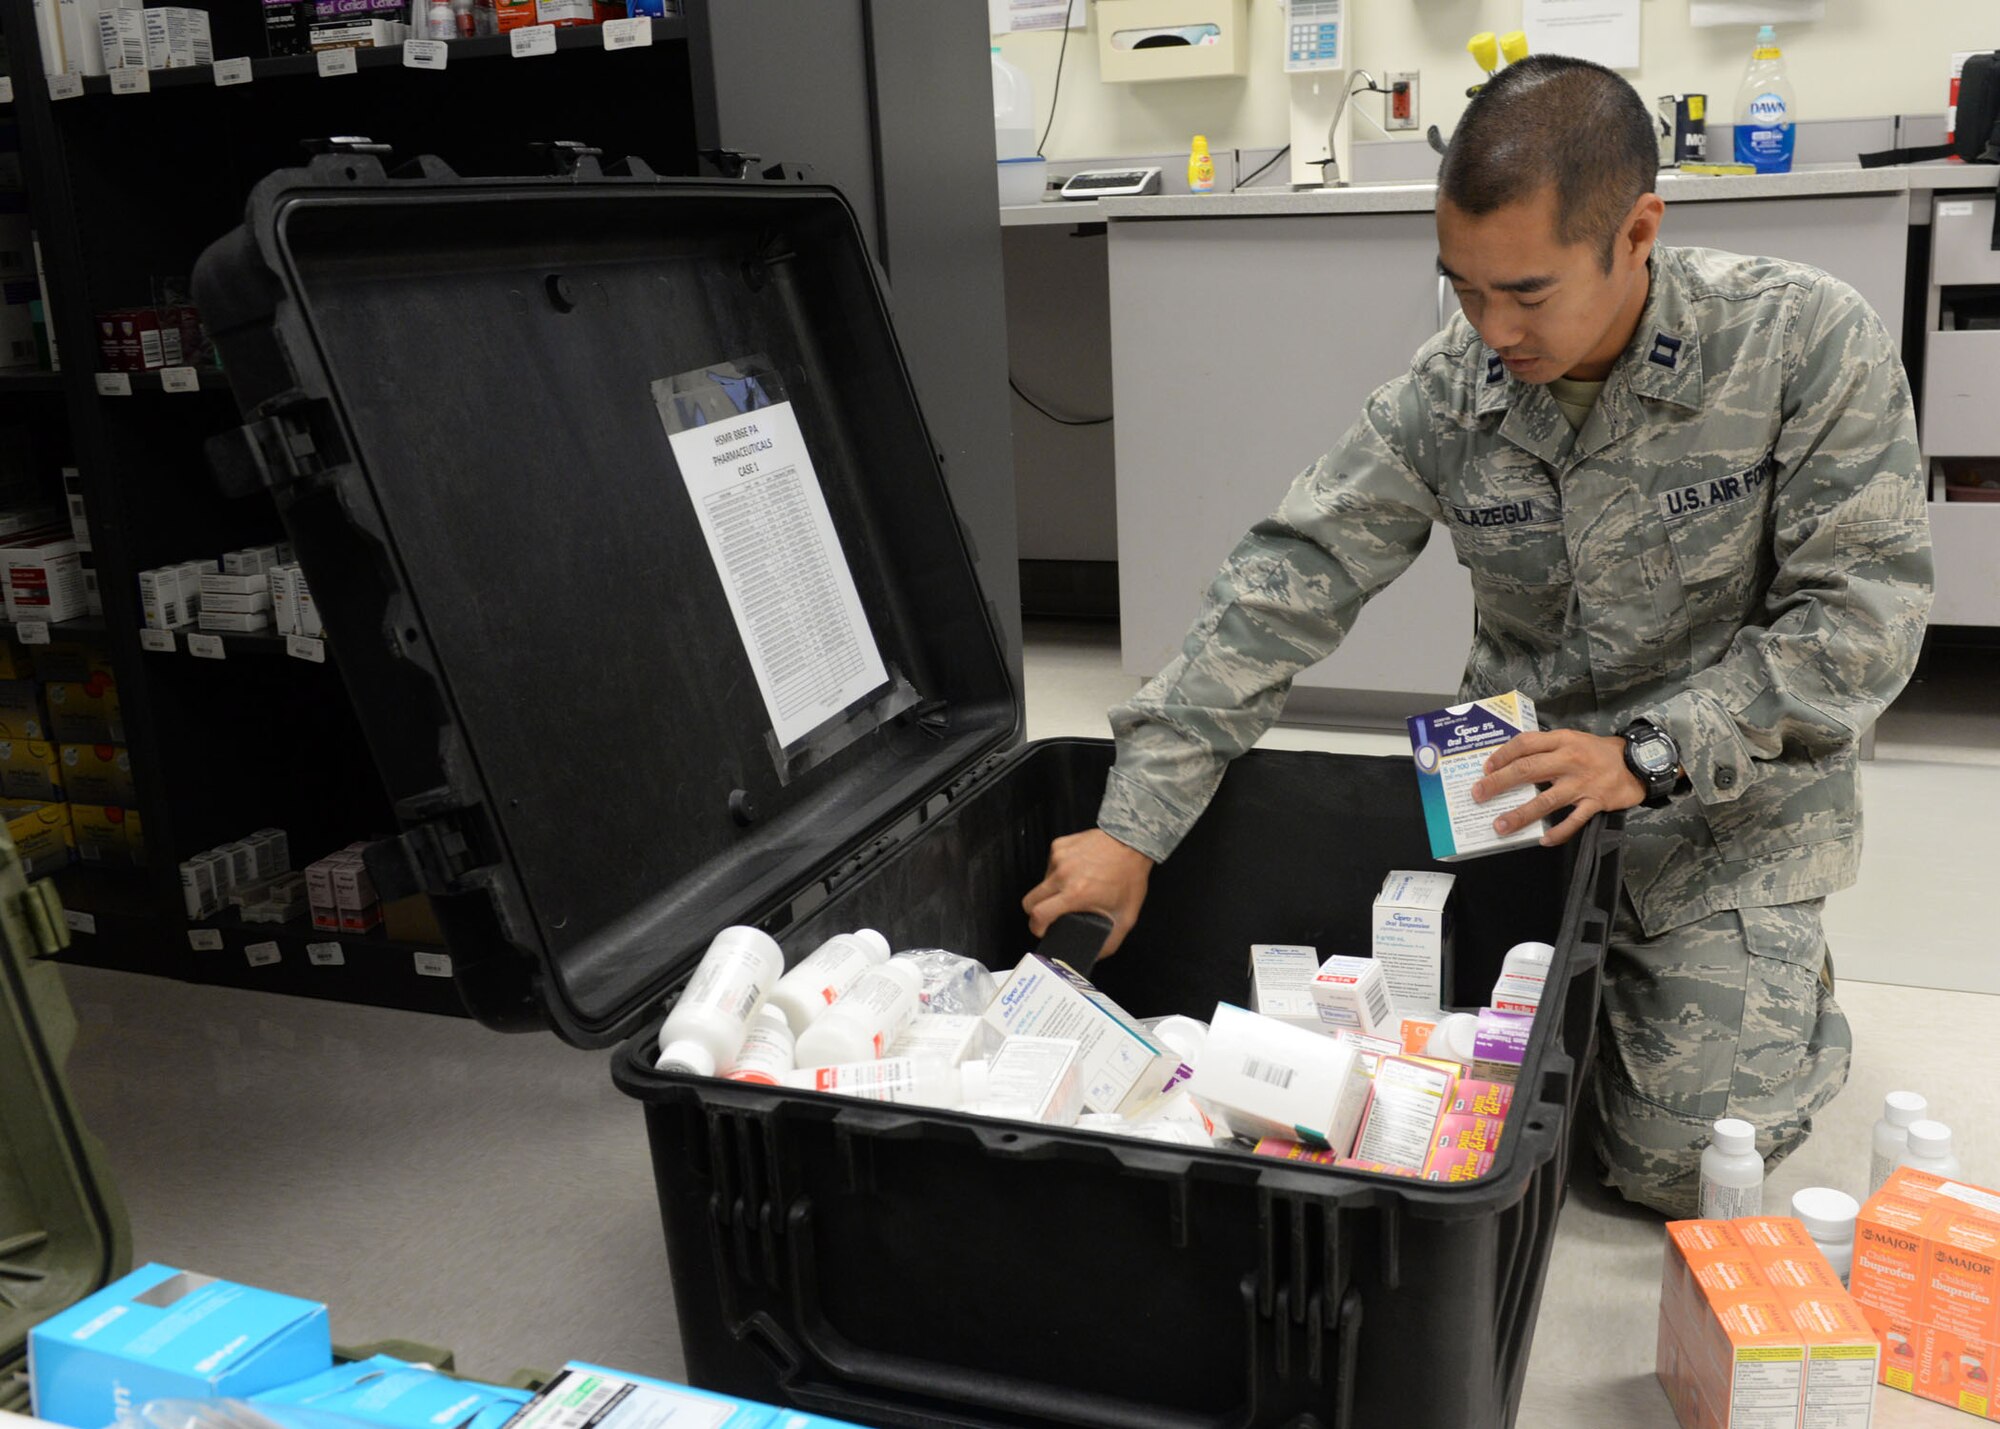 Capt. Ronald Elazegui, 36th Medical Support Squadron pharmacist, organizes a medical evacuation kit July 1, 2015, at Andersen Air Force Base, Guam. The kit is composed of medical essentials used in emergencies where the clinic is evacuated. (U.S. Air Force photo by Airman 1st Class Joshua Smoot/Released)